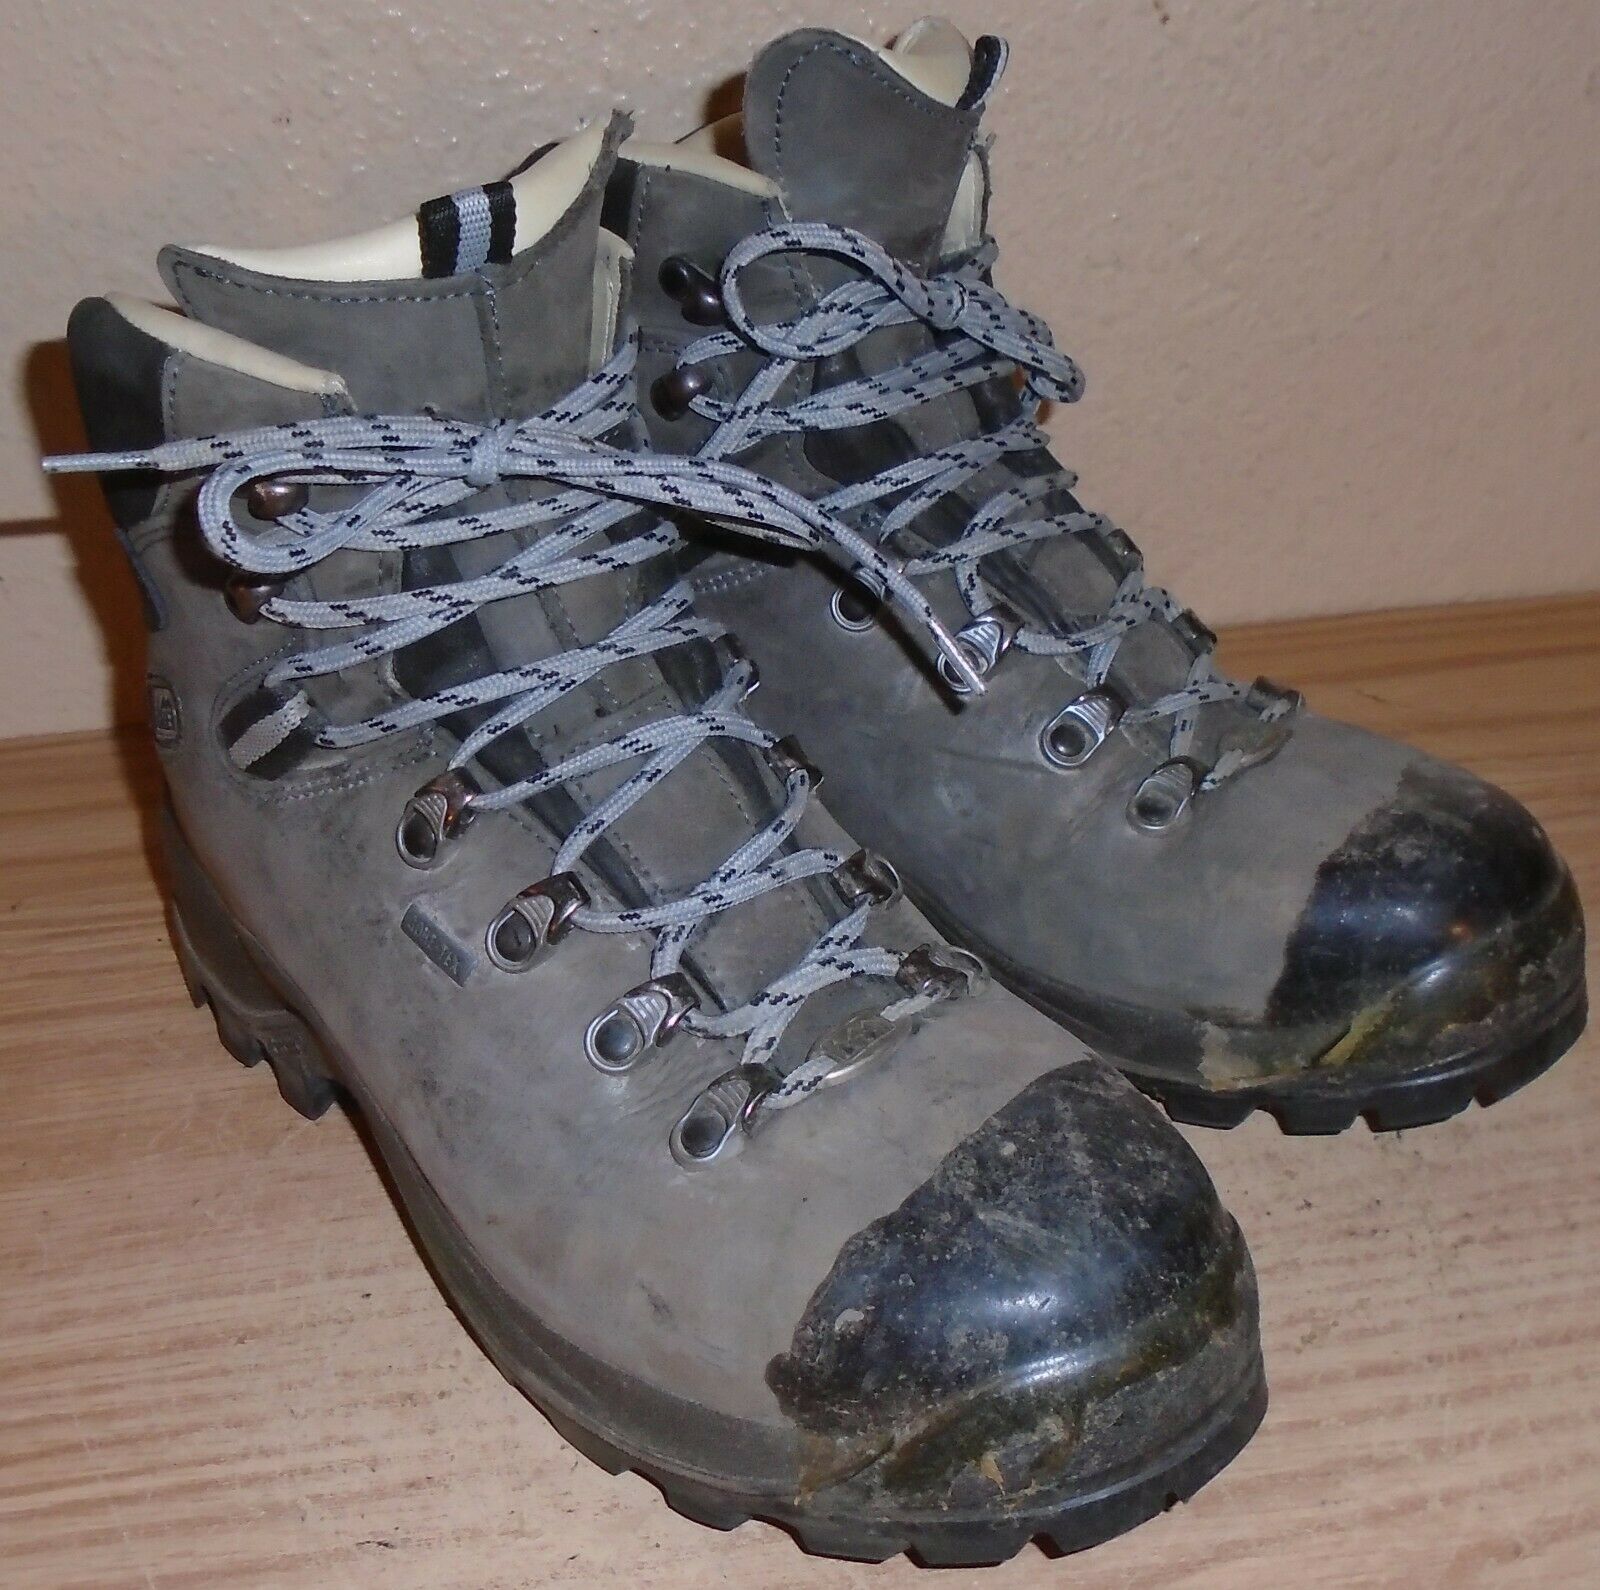 REI Women's Leather Lace-up Vibram Sole Waterproof Hiking Boots Size 8